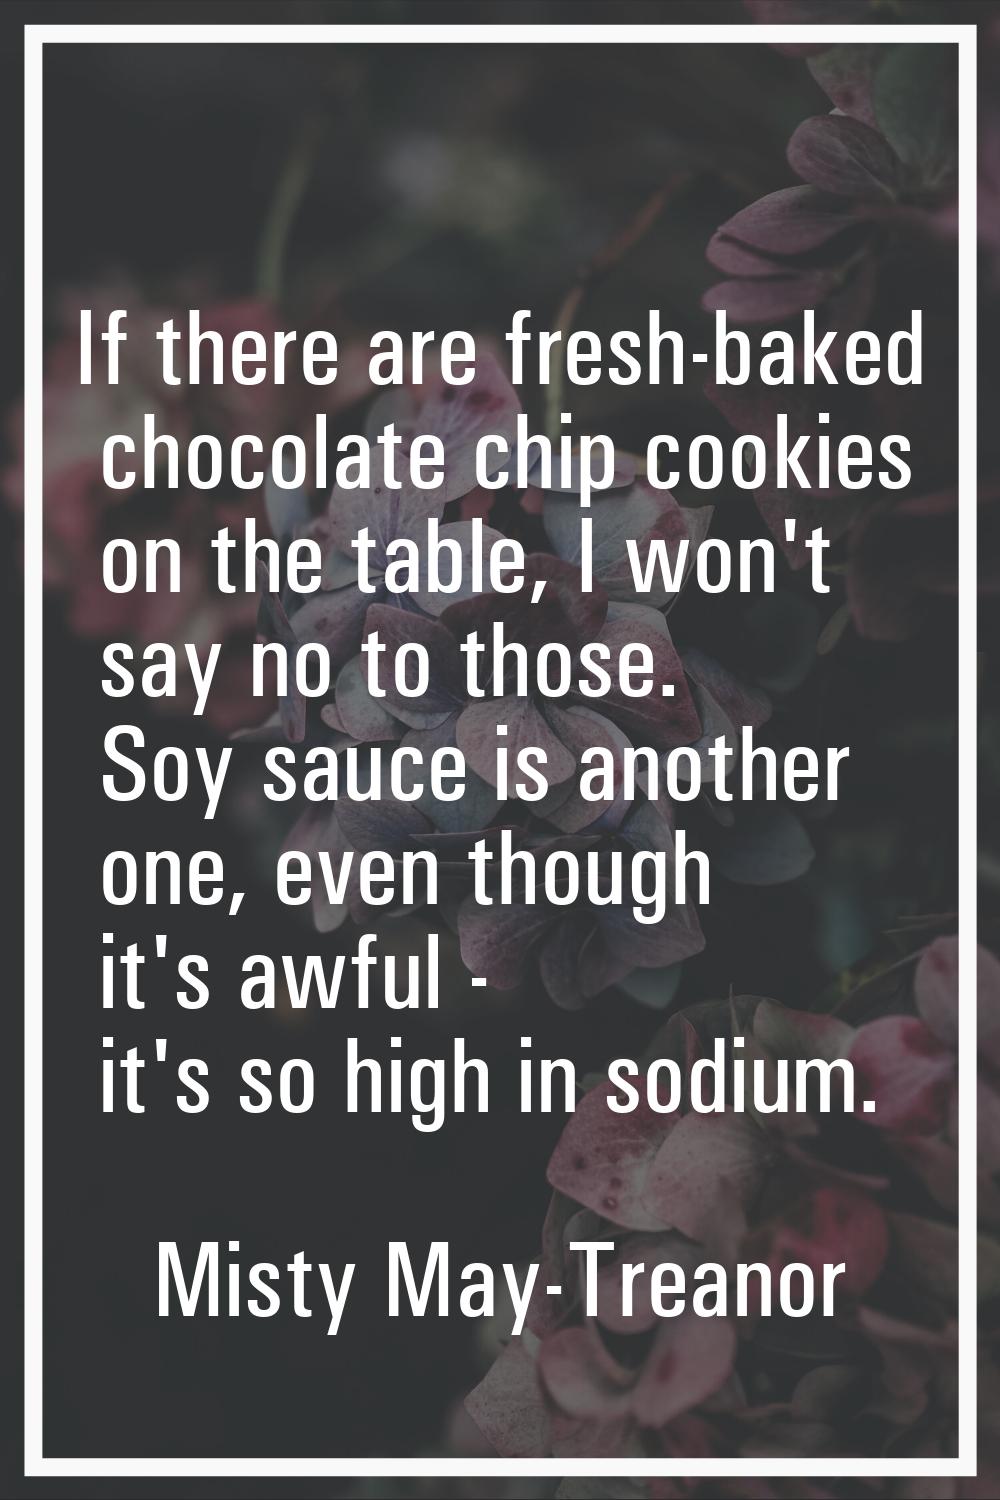 If there are fresh-baked chocolate chip cookies on the table, I won't say no to those. Soy sauce is